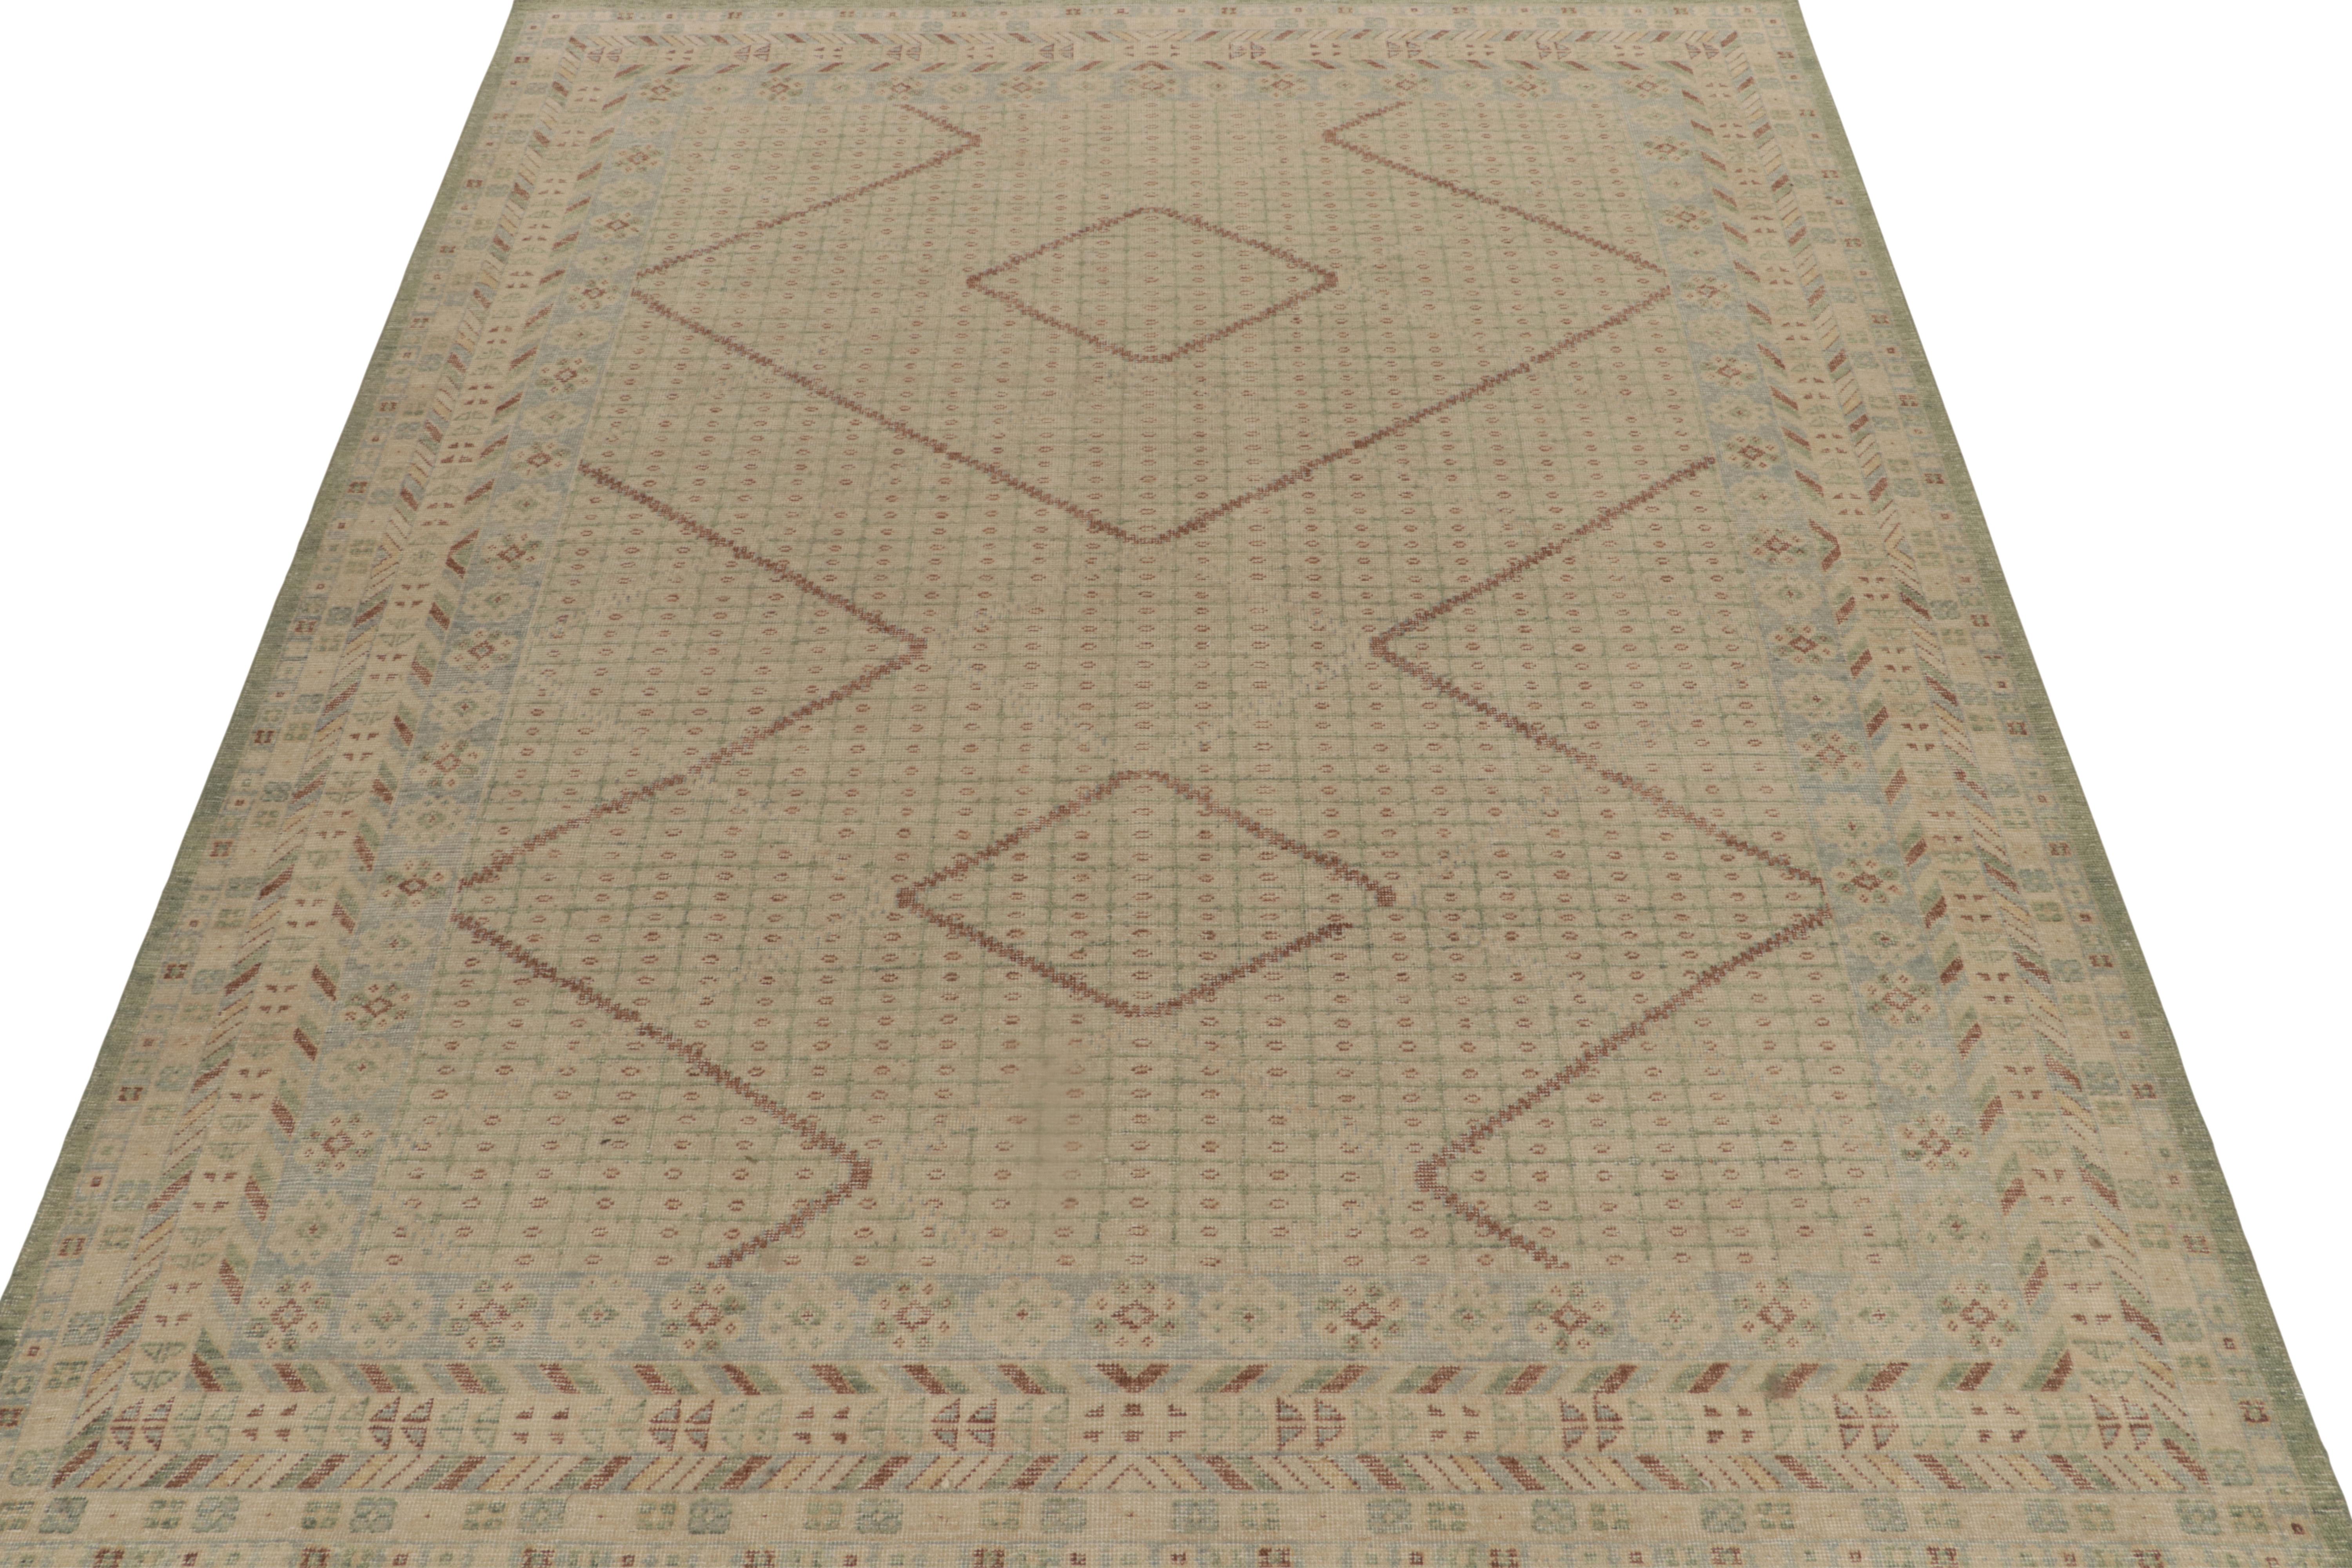 Modern Rug & Kilim’s Distressed Khotan Style Rug in Beige-Brown, Green and Blue Pattern For Sale